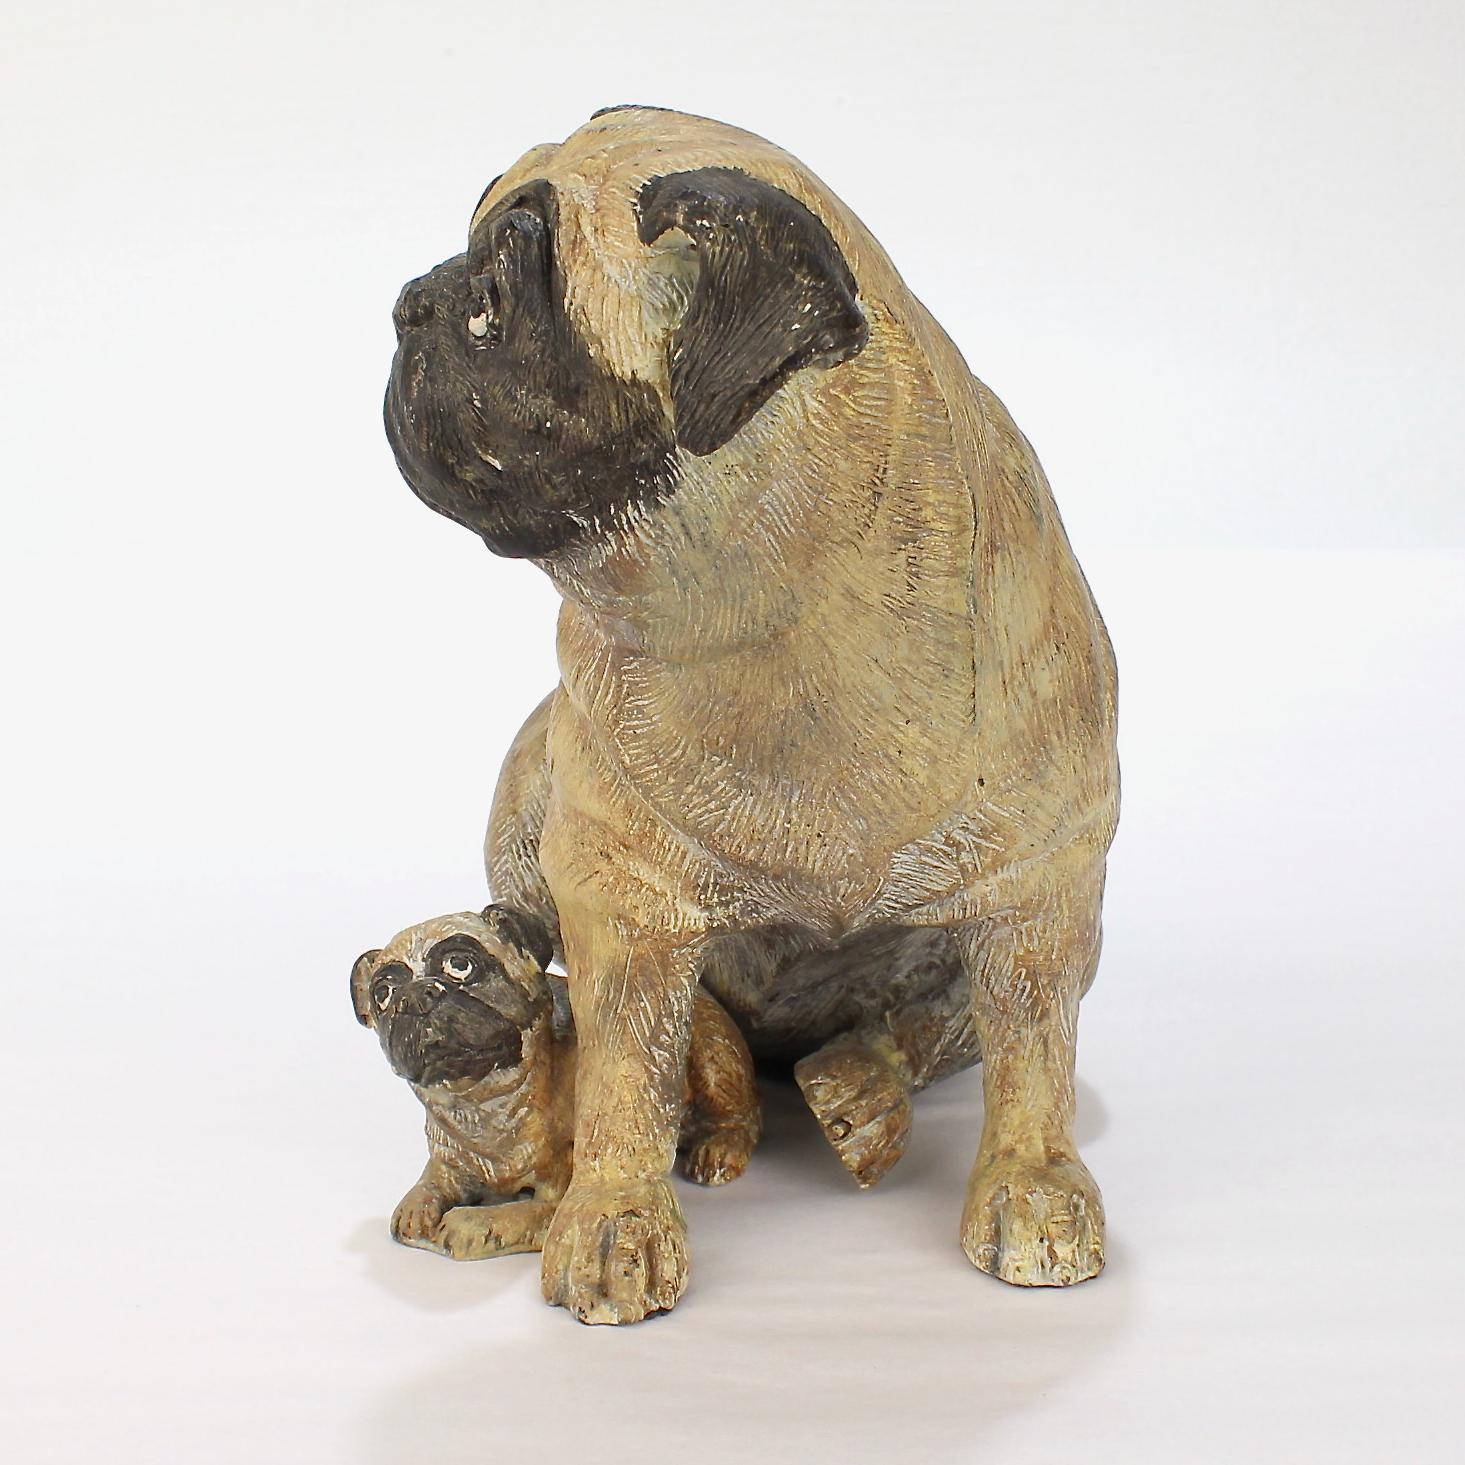 A very fine cold-painted pug mother and puppy bronze sculpture. 

With a small puppy nestled at its mother's feet depicted in the manner of the 18th century Meissen porcelains modeled by Johann Joachim Kändler.

From the collection of the